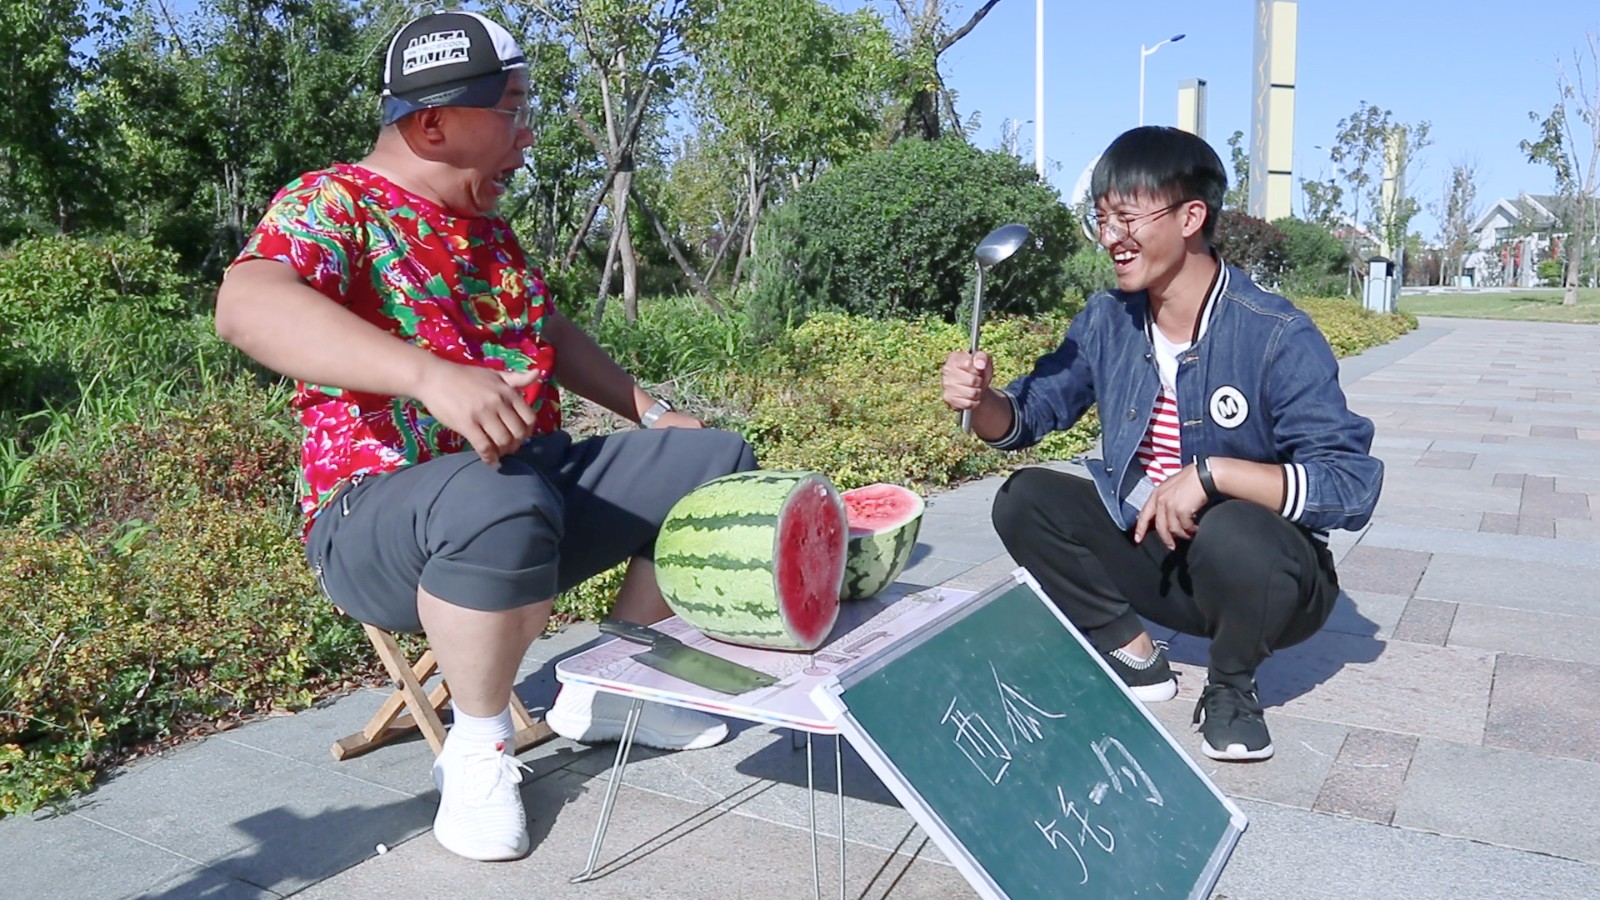 It's absolute to sell watermelon for 50 cents a spoonful and not think of a young man who ate half of the watermelon for 50 cents.